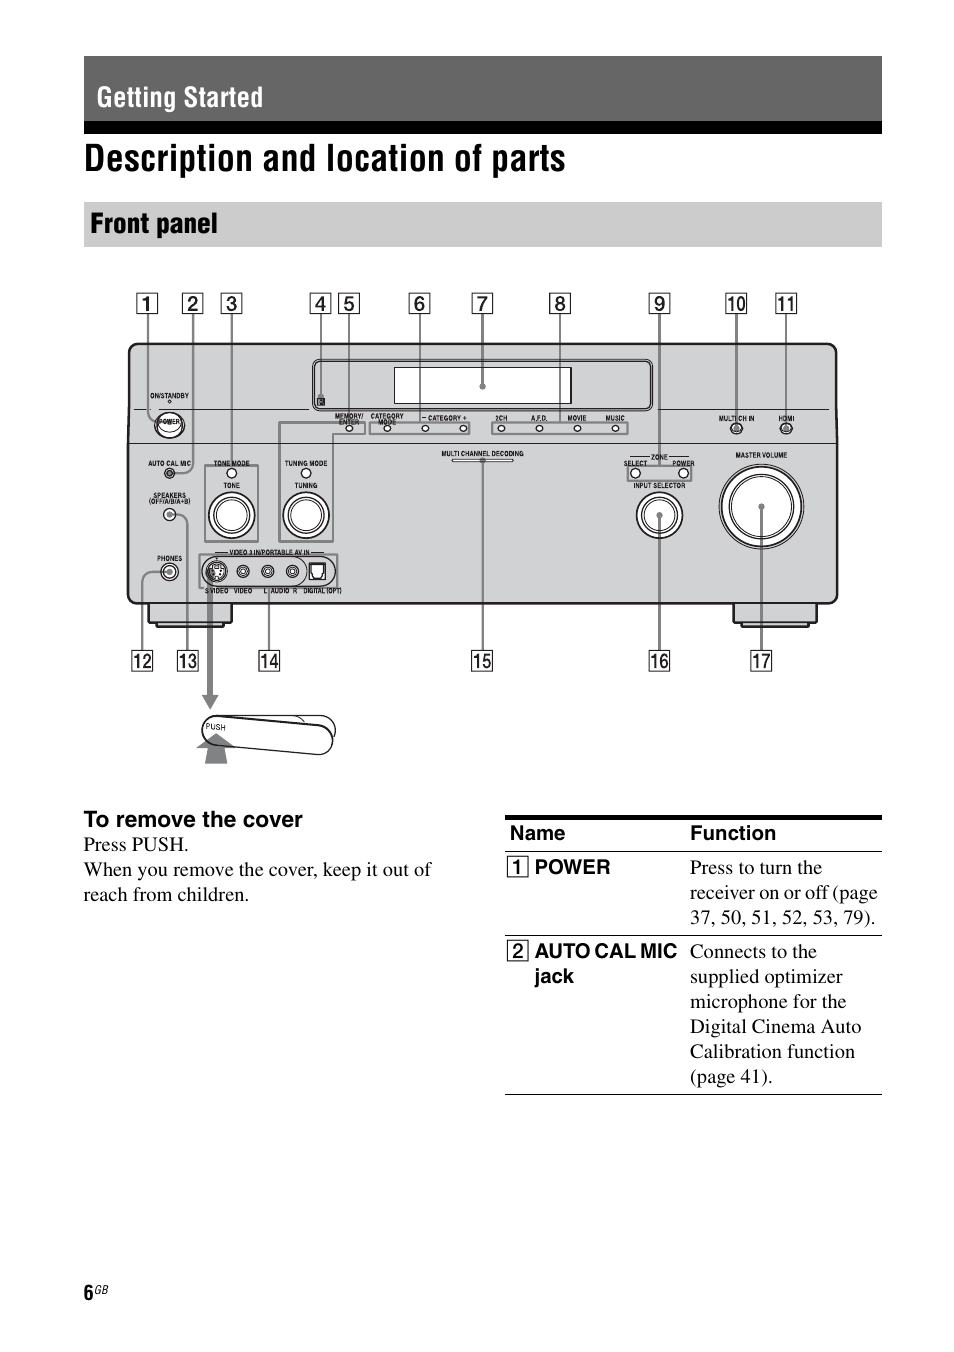 Getting started, Description and location of parts, Getting started front panel | Sony STR-DG1000 User Manual | Page 6 / 123